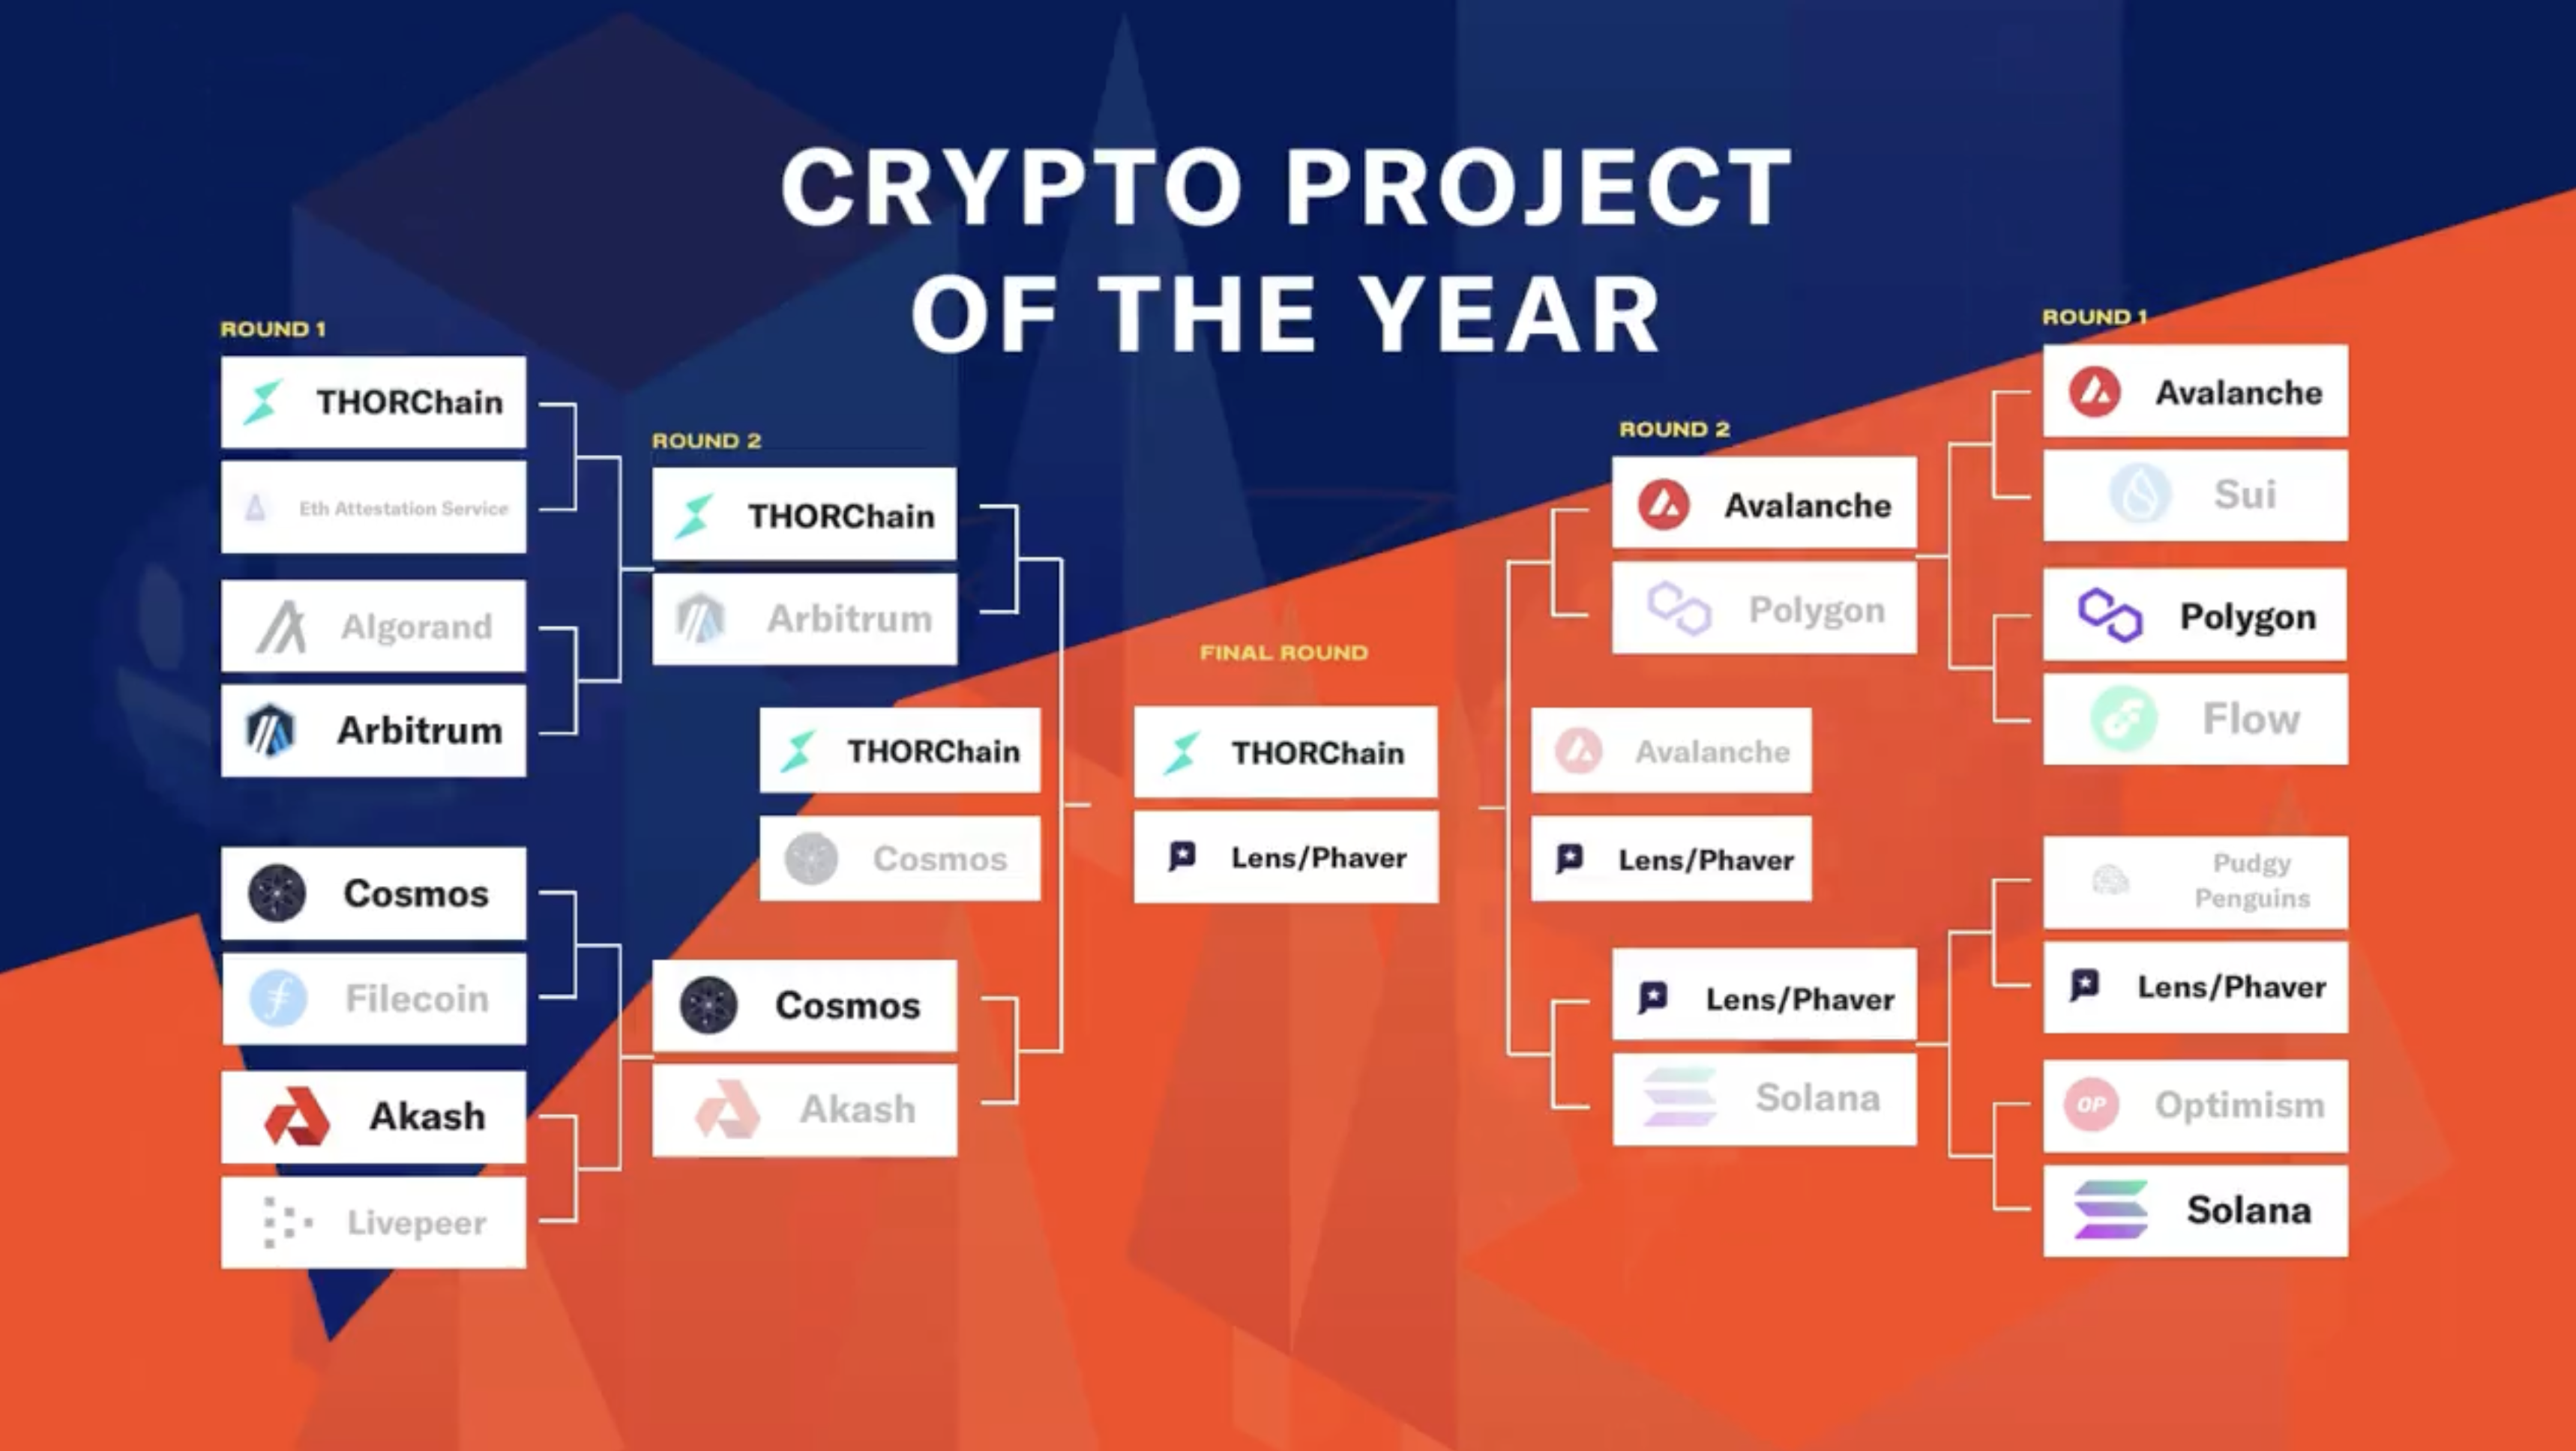 After beginning with 16 of crypto's top projects, our bracket has been whittled down to THORChain and Lens/Phaver.